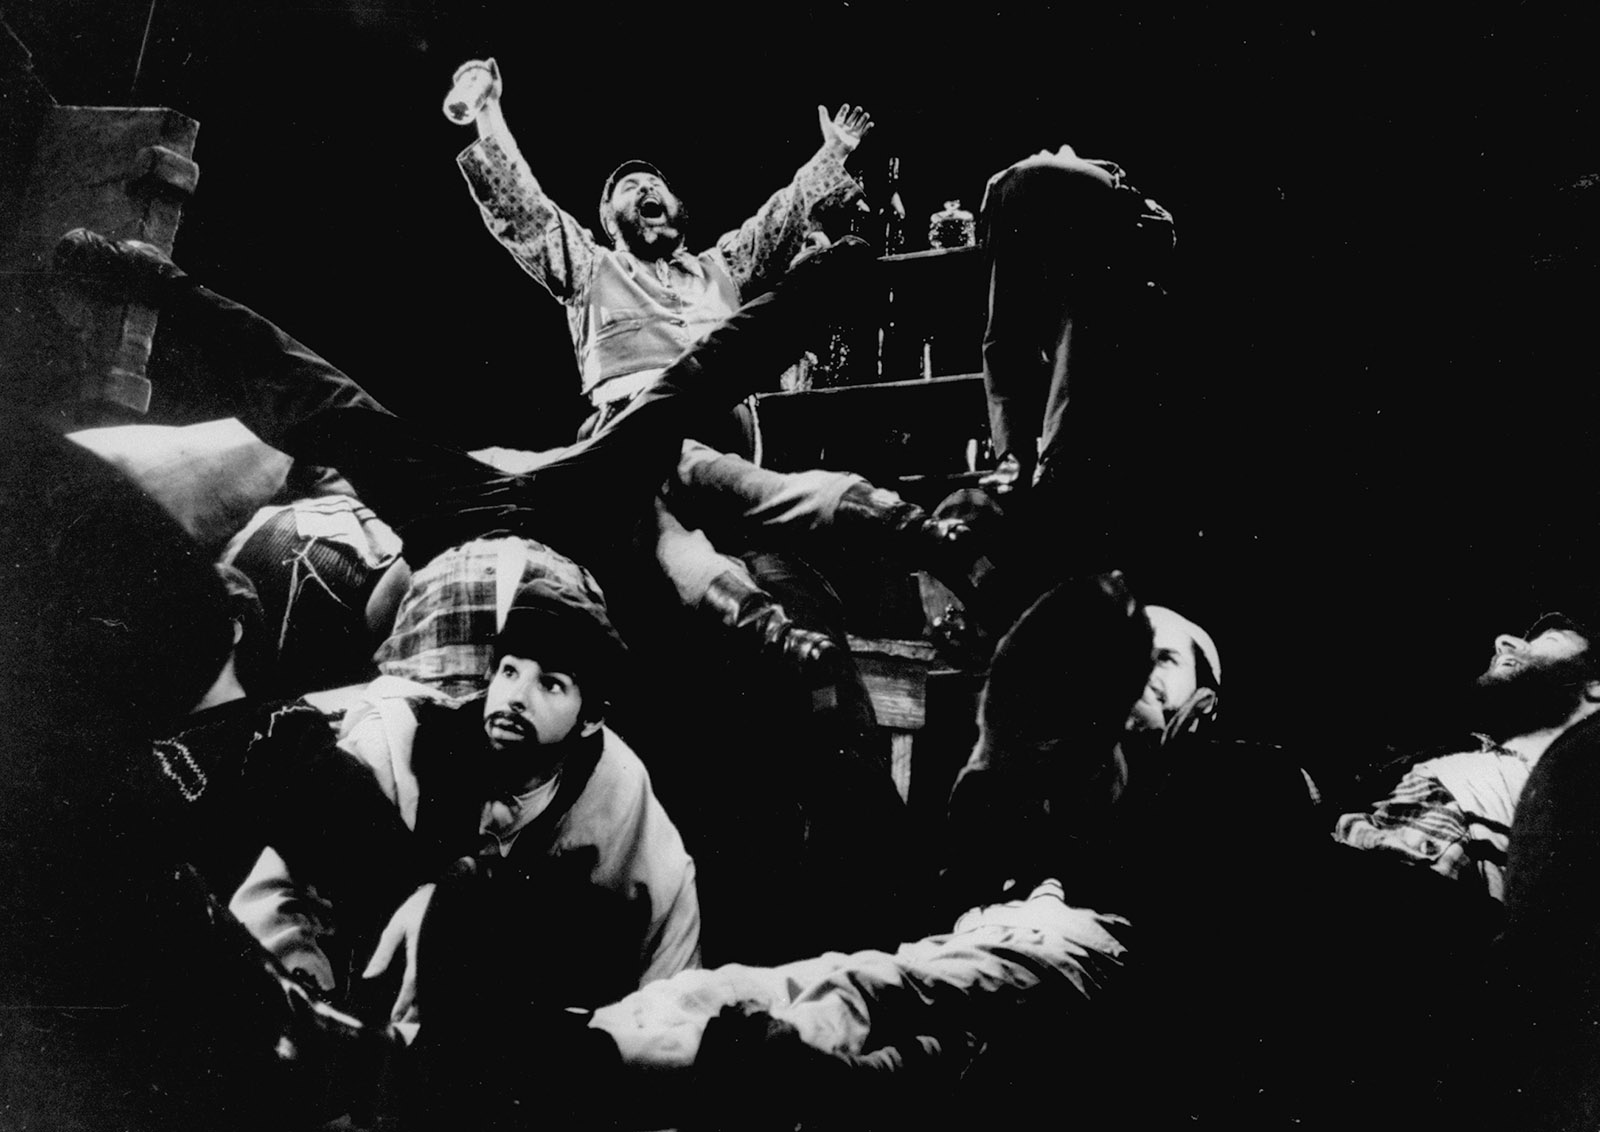 Zero Mostel as Tevye, and other members of the cast, in the original Broadway production of Fiddler on the Roof, New York, 1964